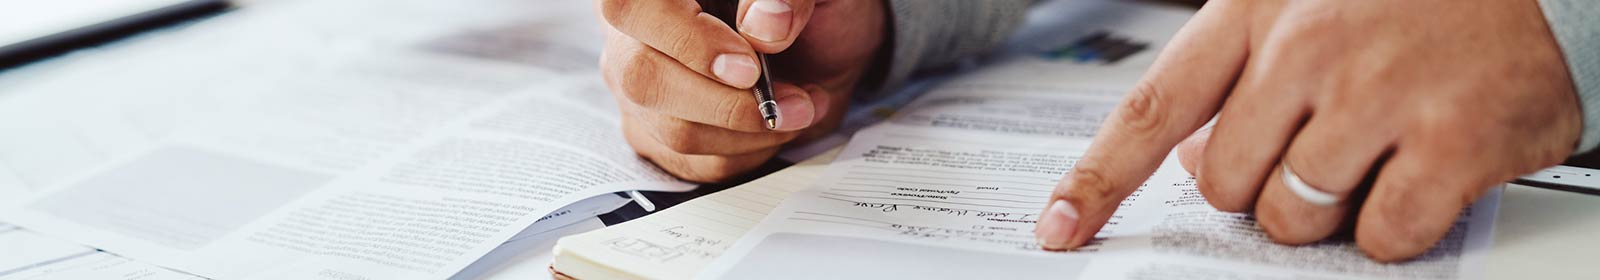 a person reviewing documents